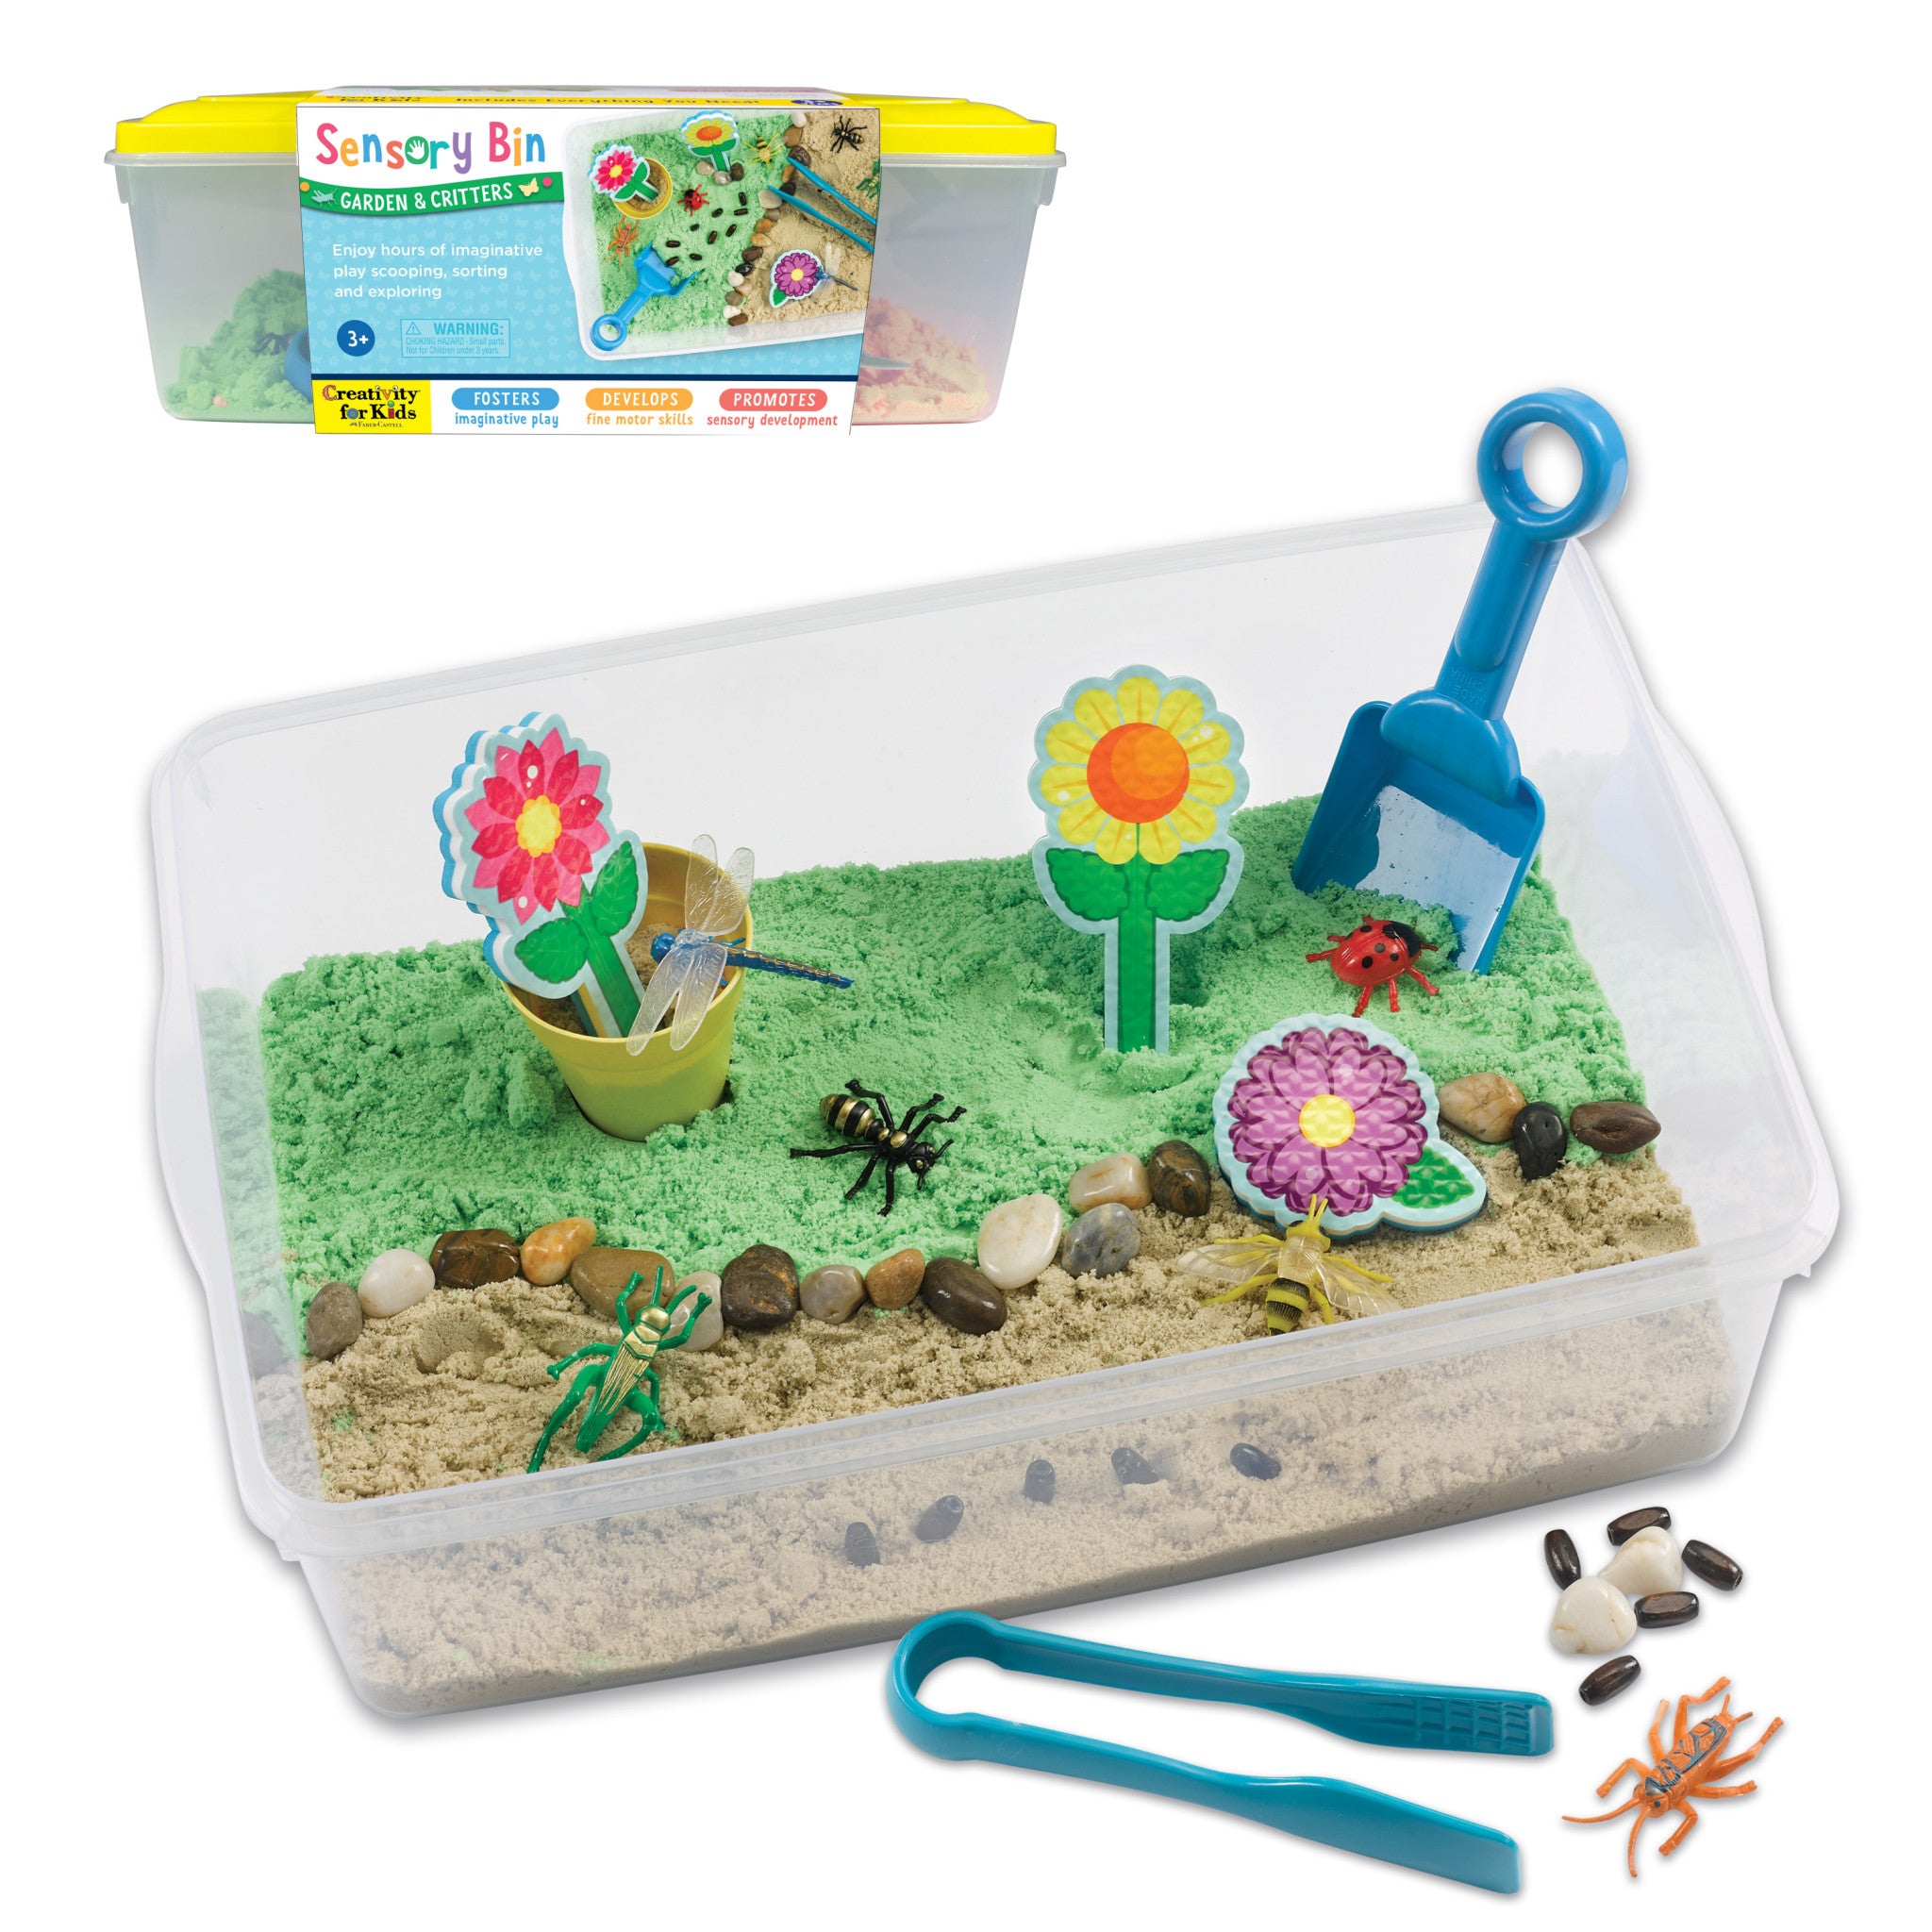 BOREDOM BUSTER CREATIVITY KITS! HUGE DISCOUNTS! LIMITED QUANTITIES